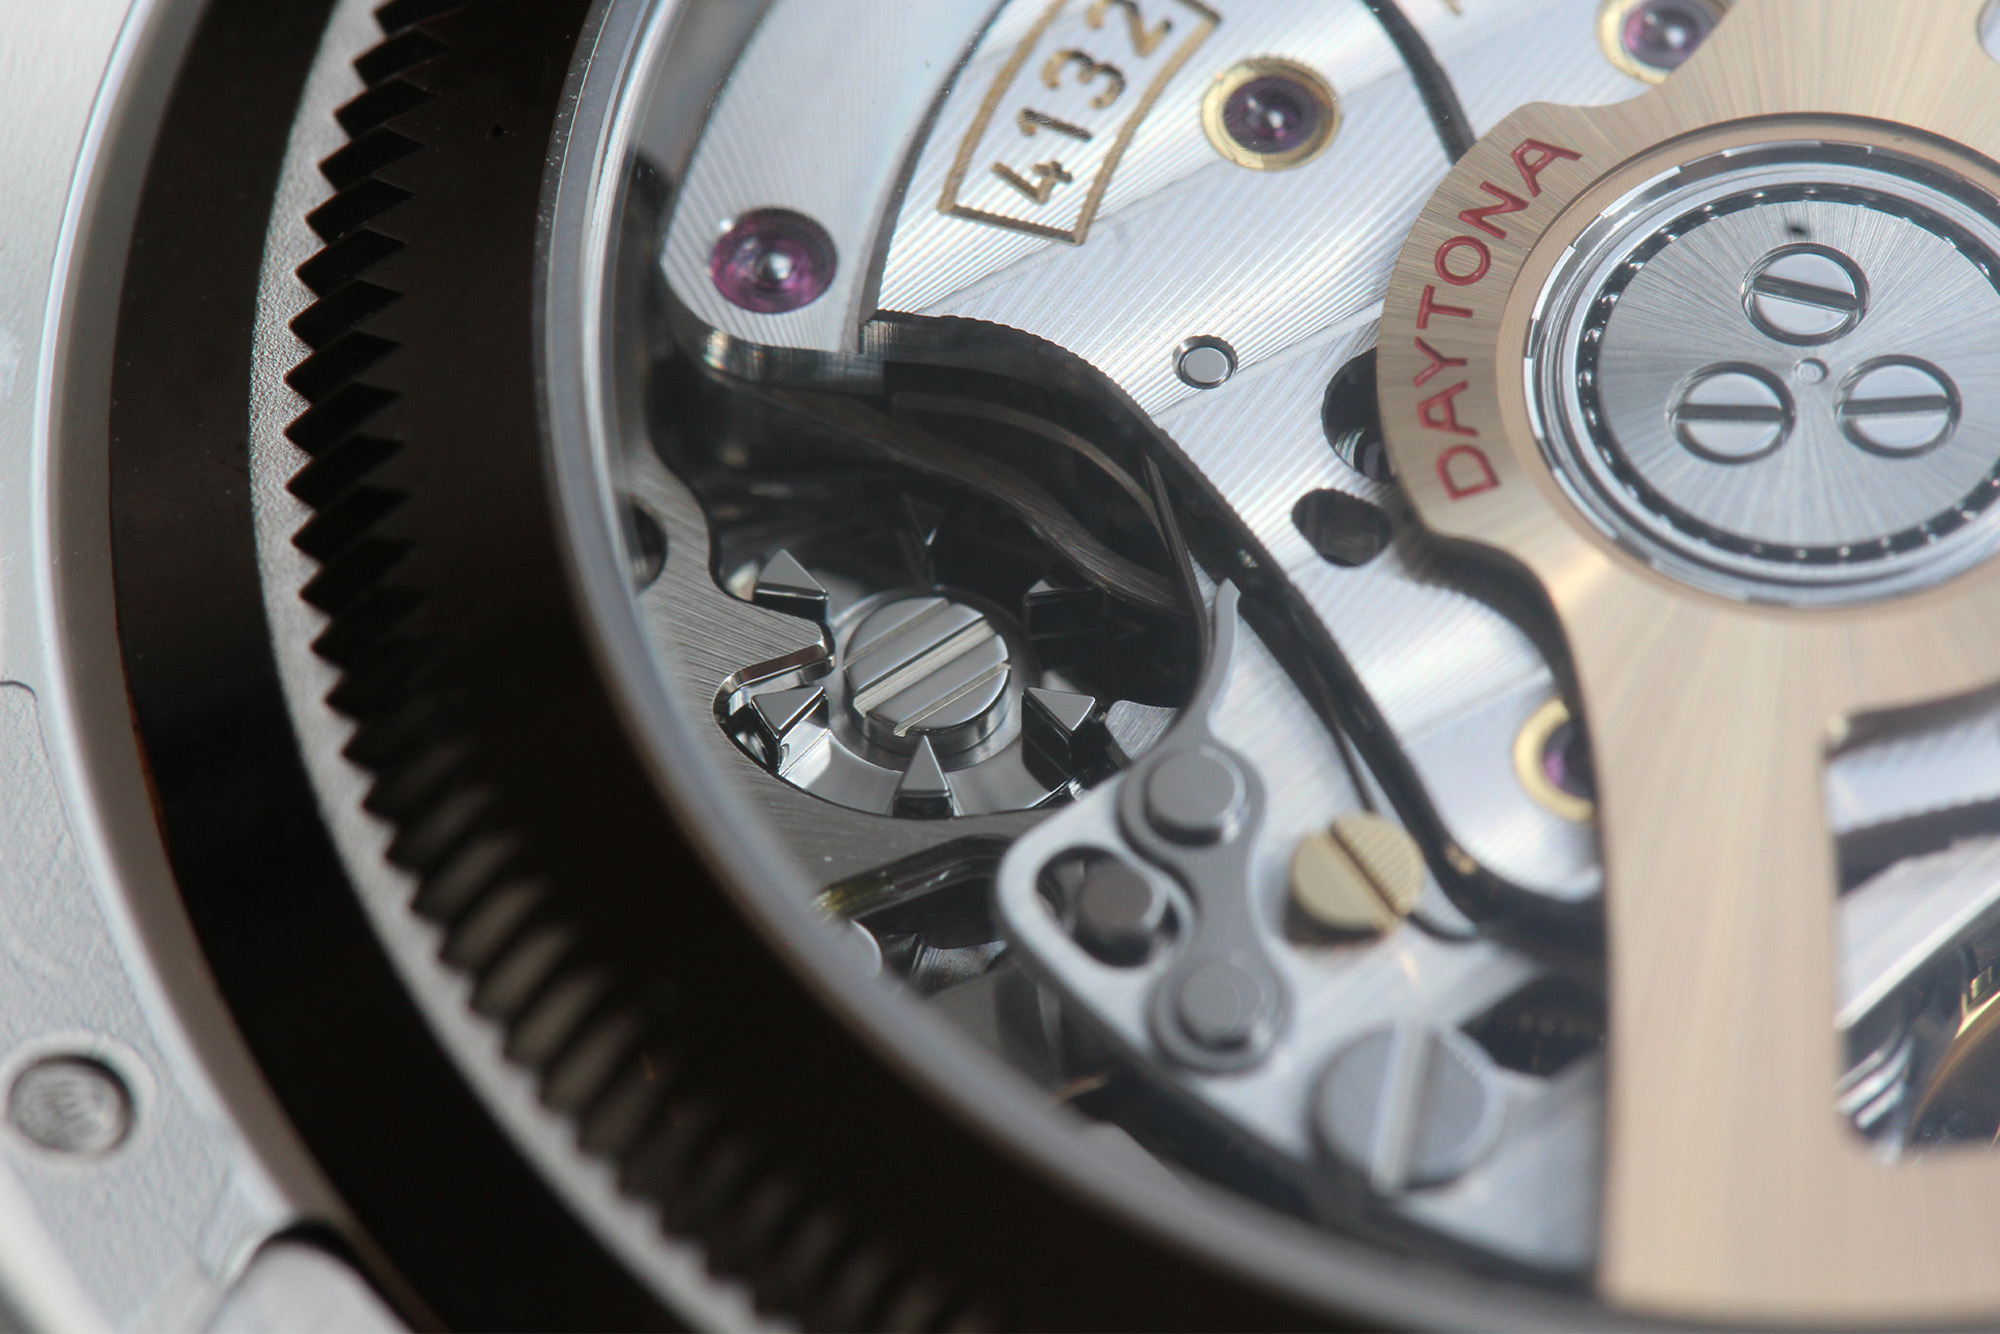 Rolex Cosmograph Daytona Le Mans from the back close-up